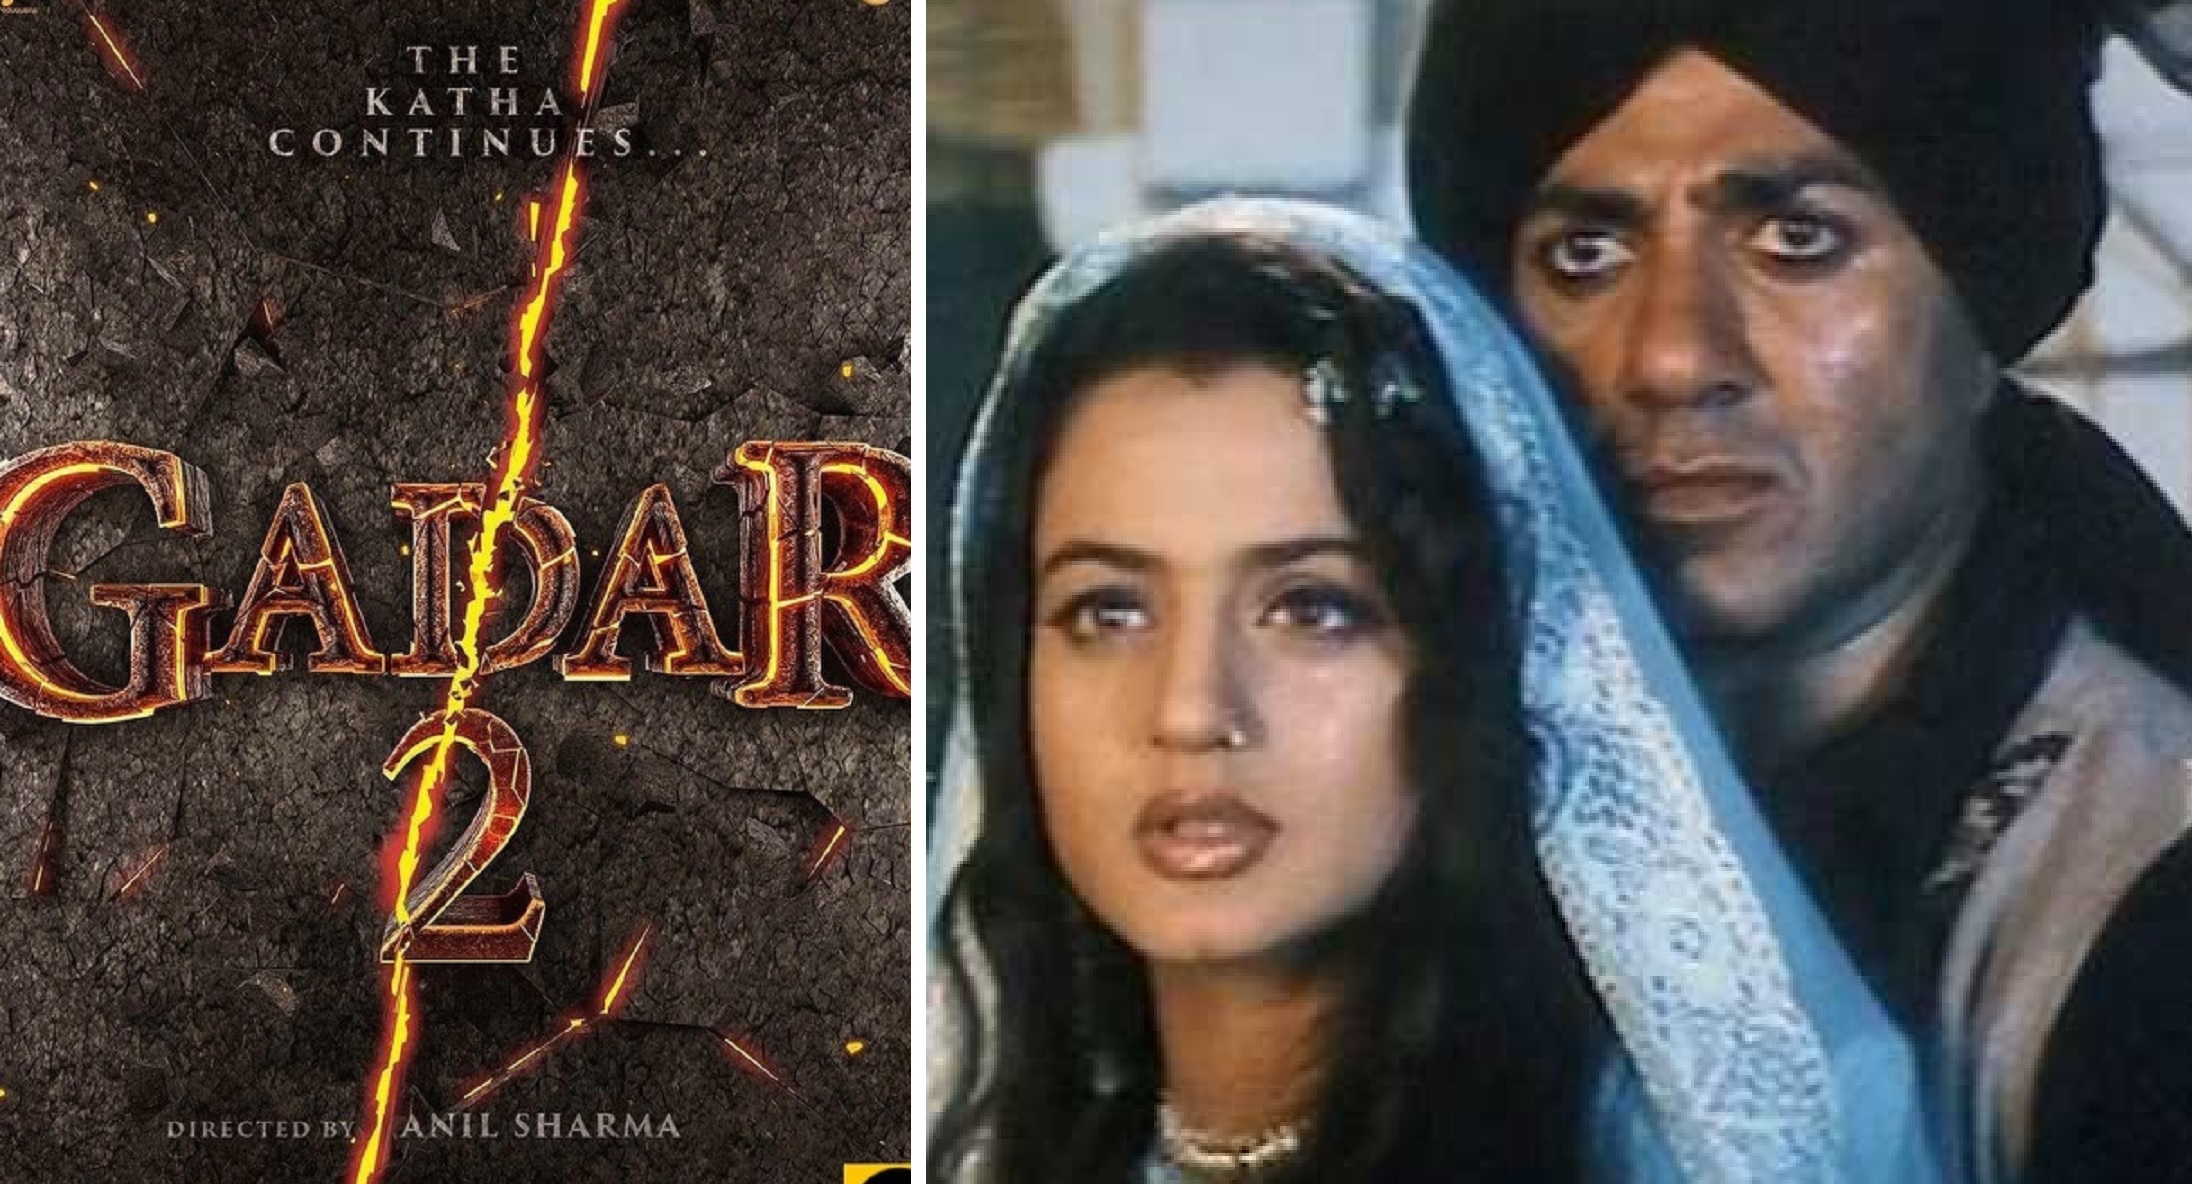 Gadar 2: Sequel Of Sunny Deol’s Megahit Has Been Announced, Will Feature Him Reprising His Role Of Tara Singh